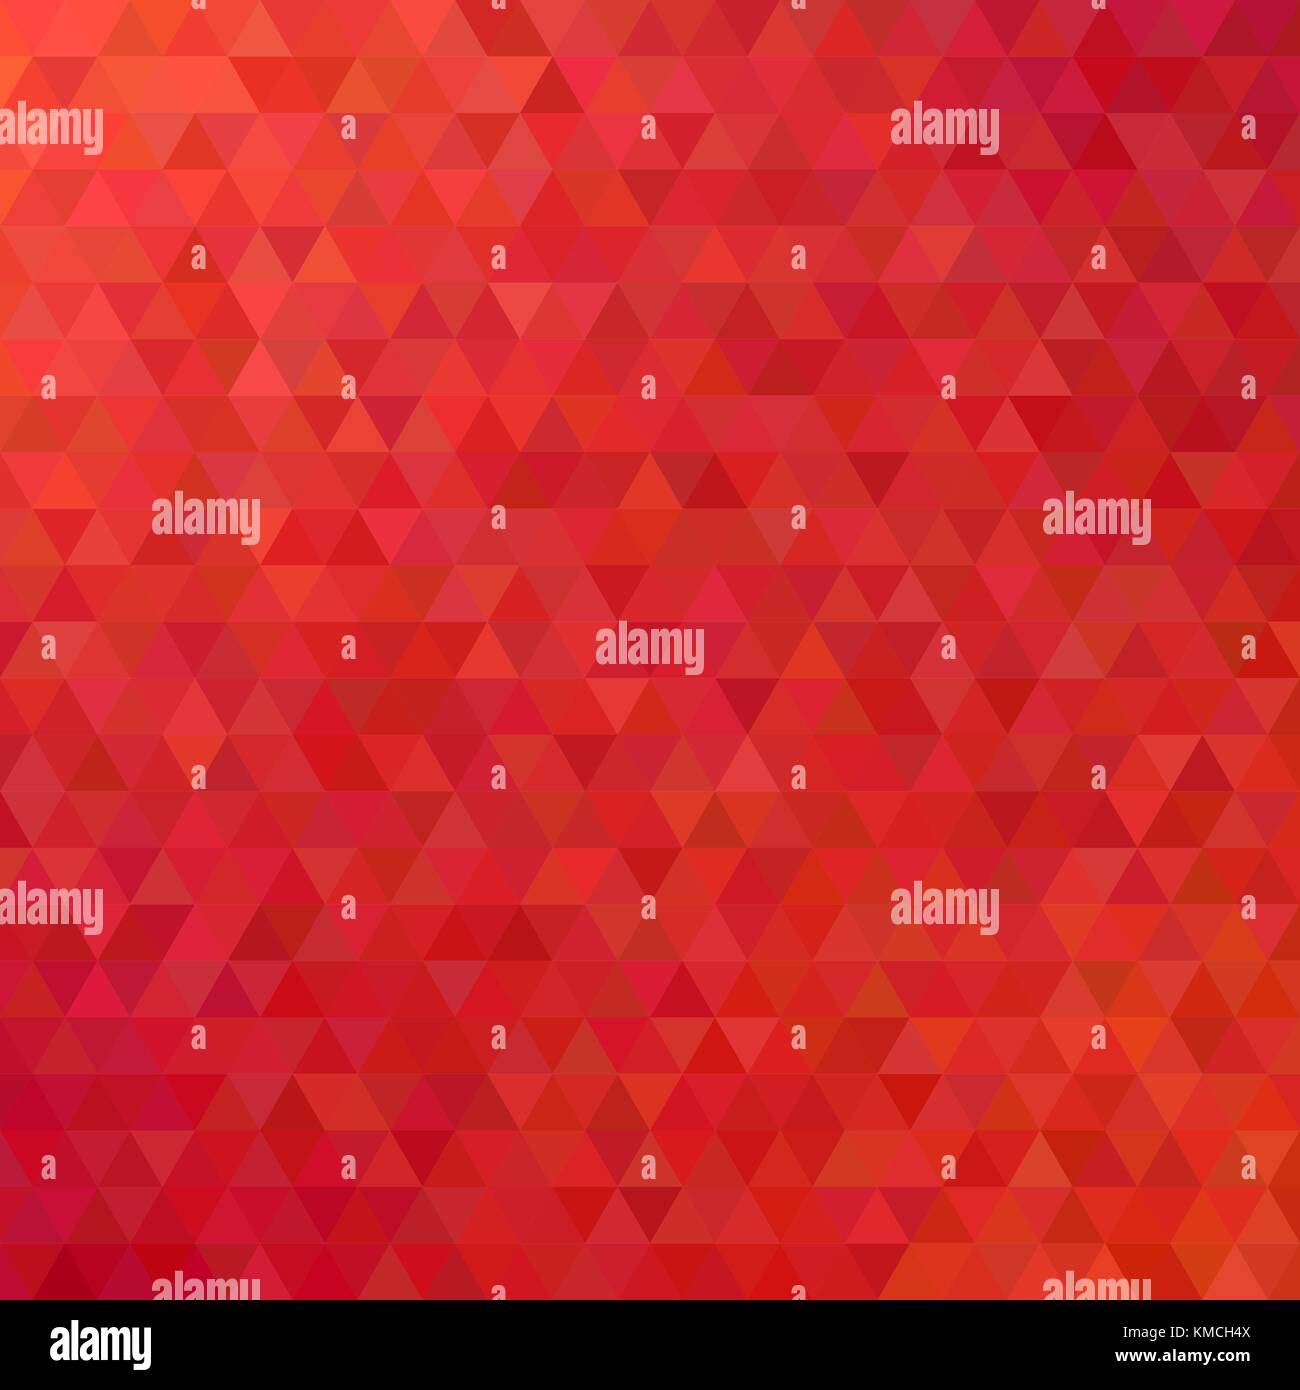 https://c8.alamy.com/comp/KMCH4X/red-abstract-mosaic-triangle-tile-pattern-background-modern-polygon-KMCH4X.jpg